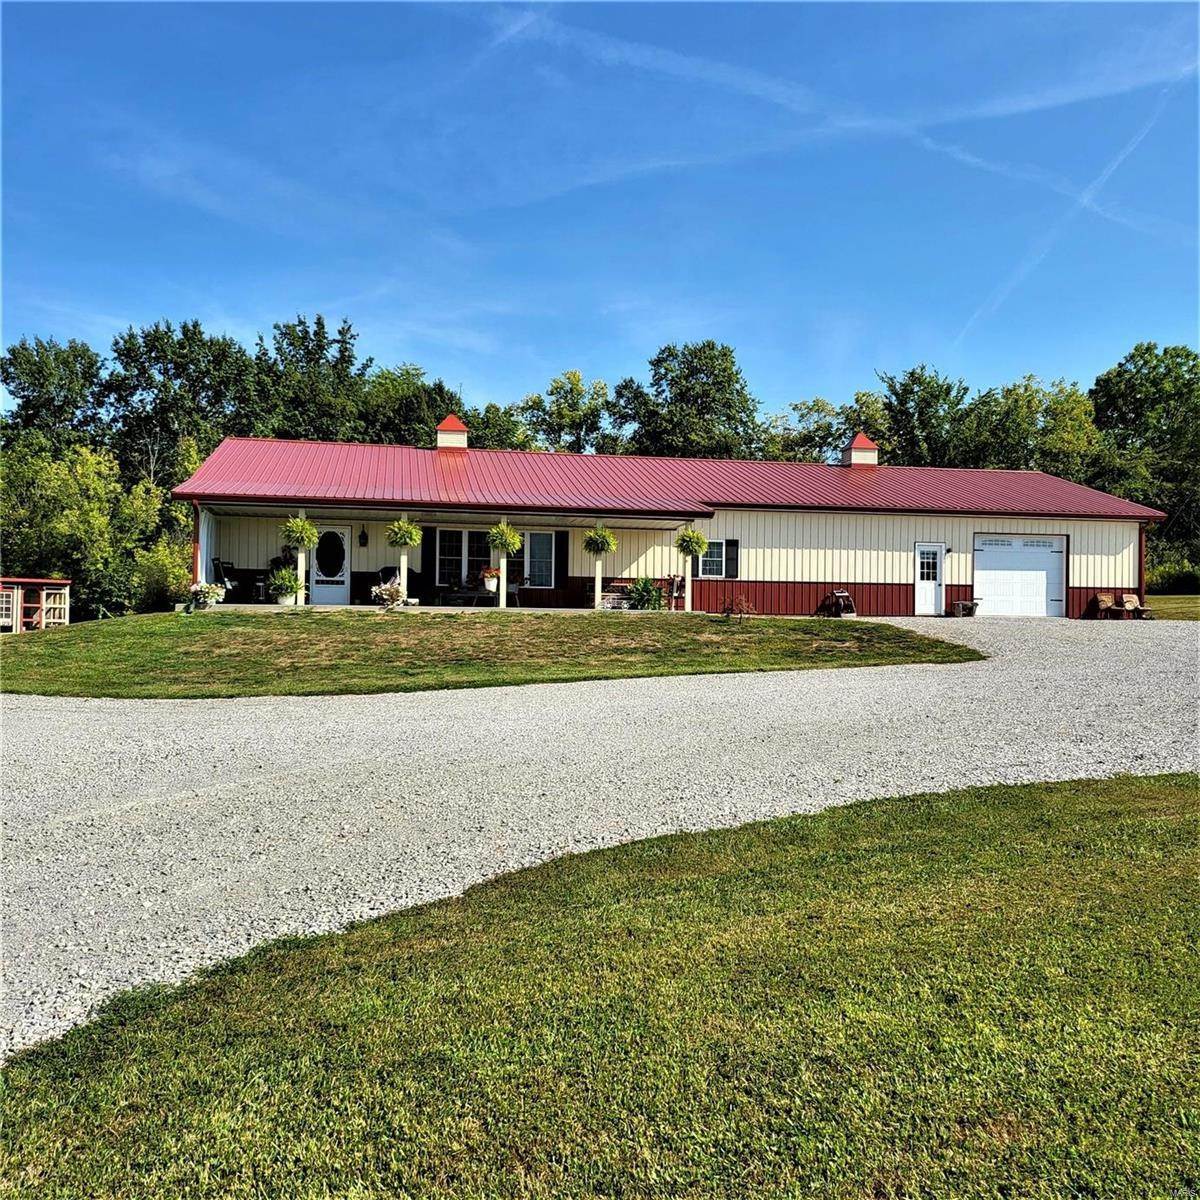 Property for Sale at 8576 County Rd. 422 Hannibal, Missouri 63401 United States